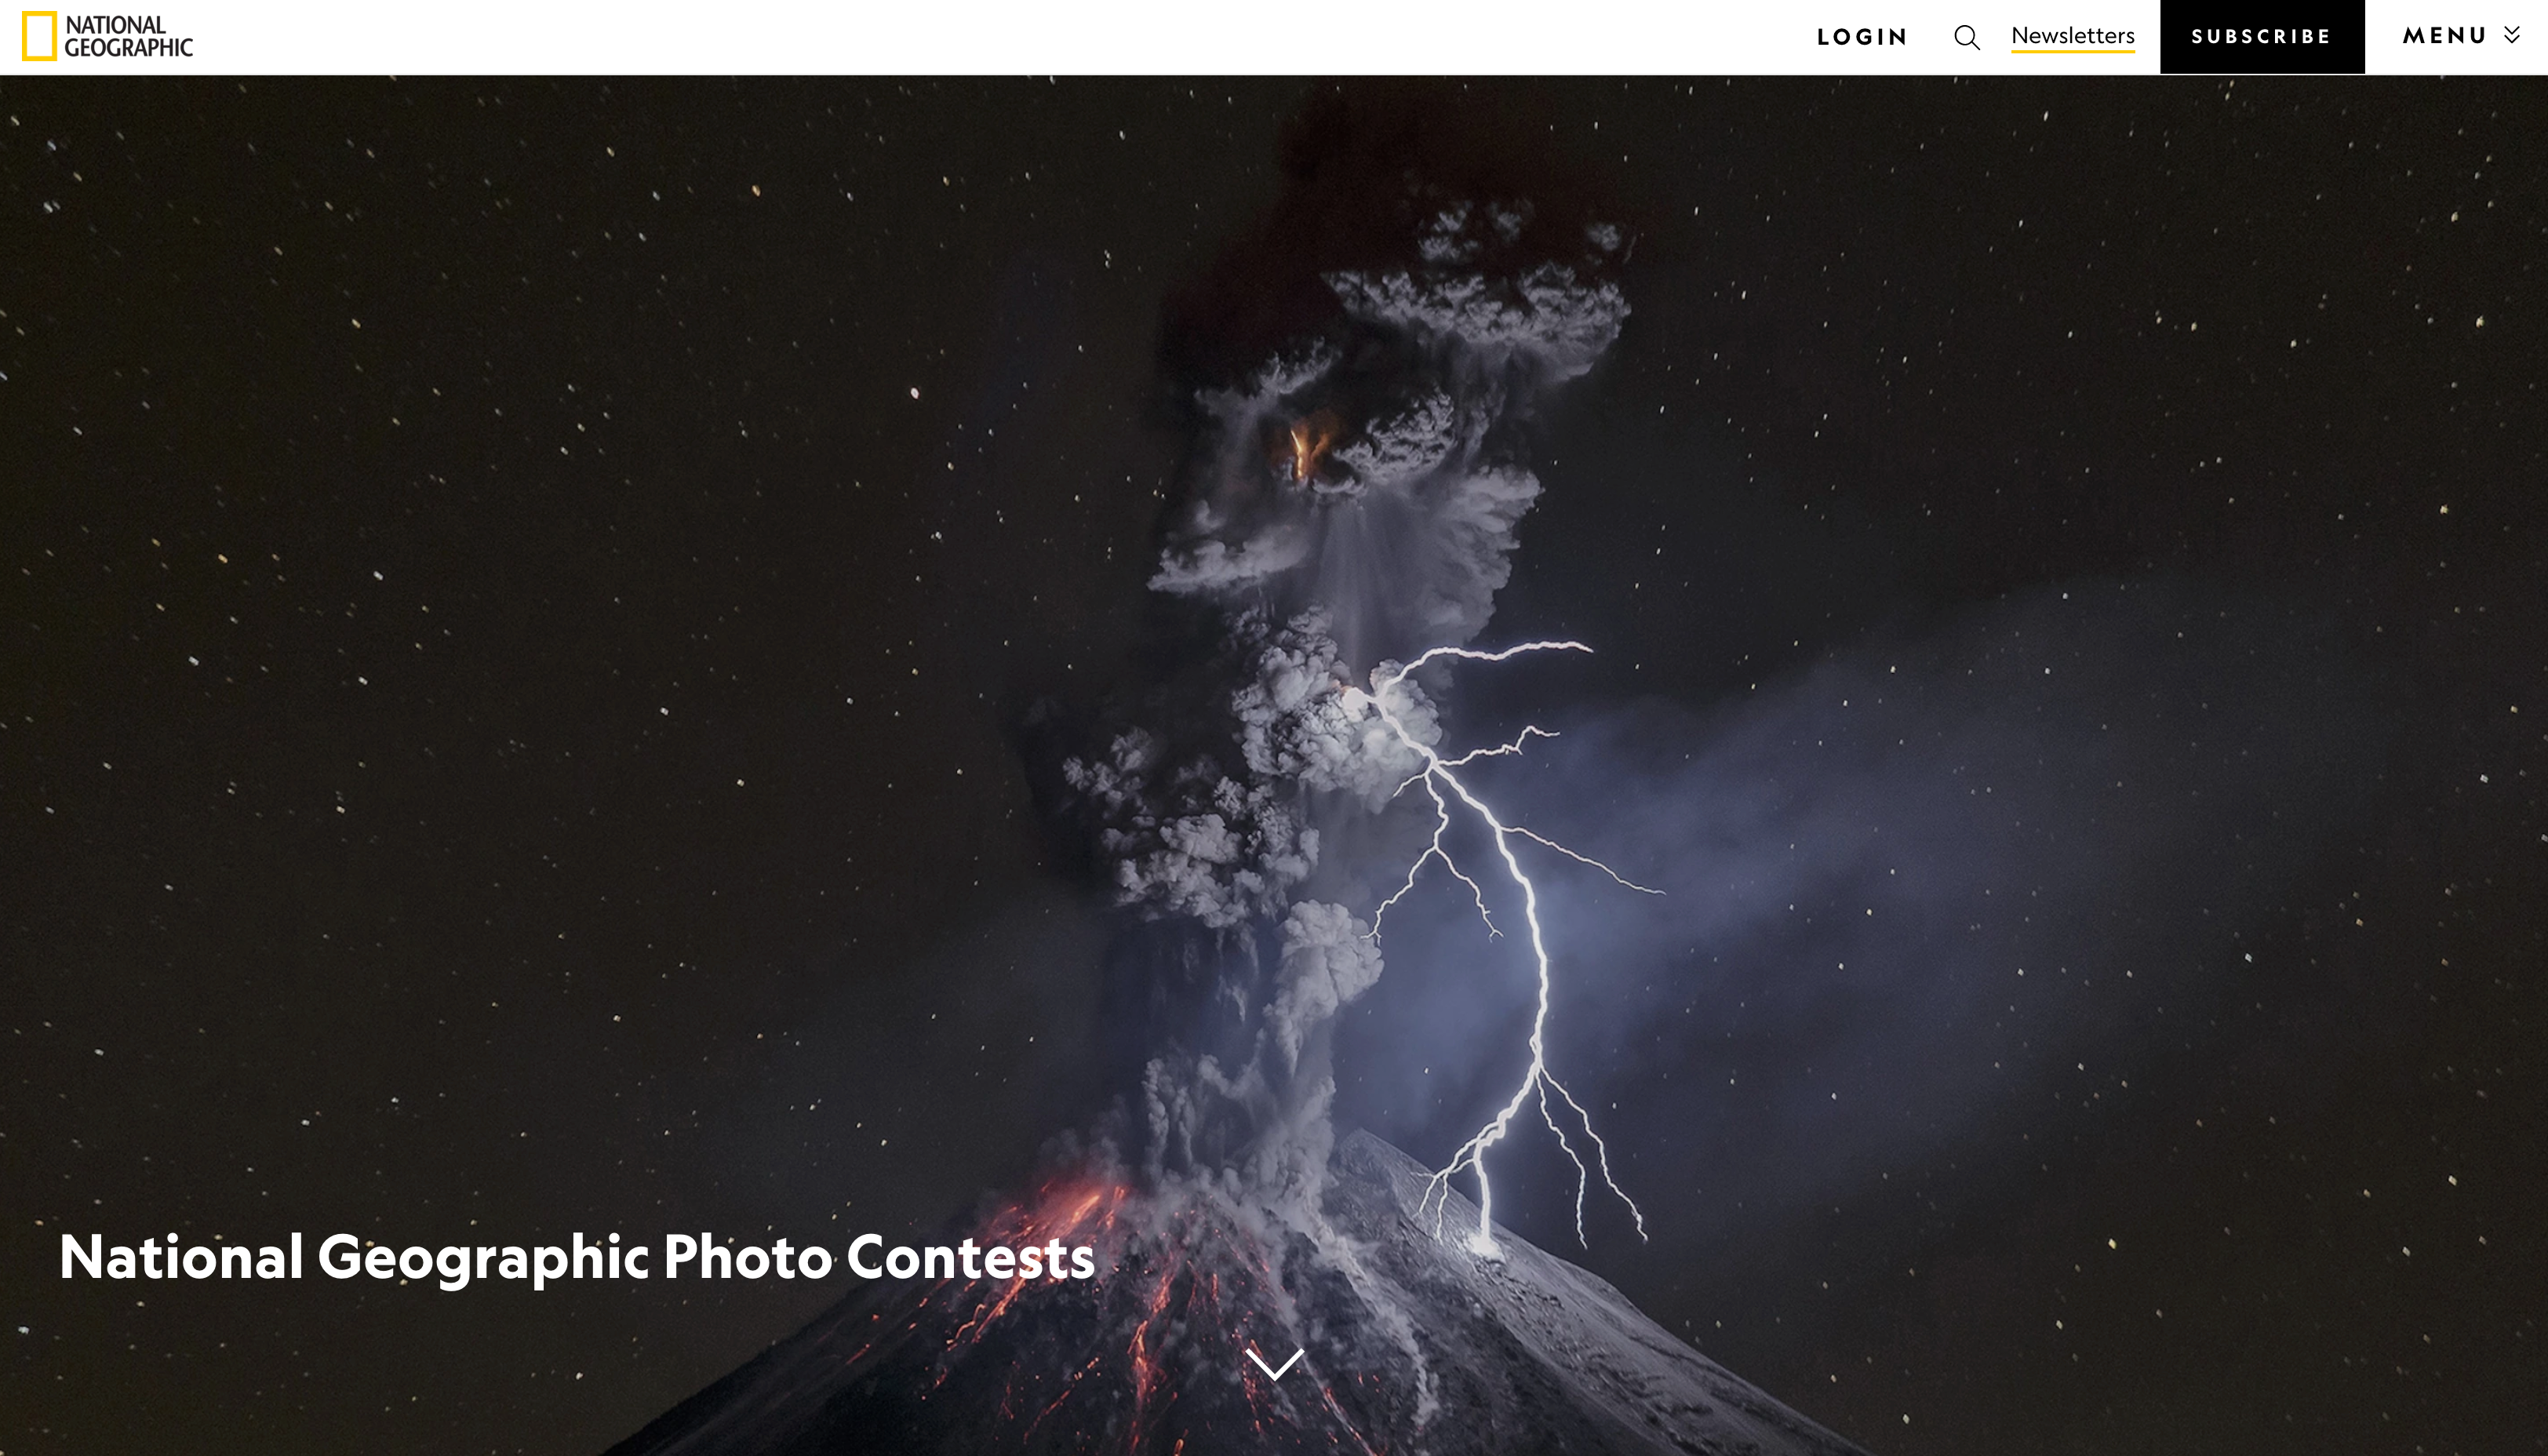 National Geographic Photography Contest Landing Page